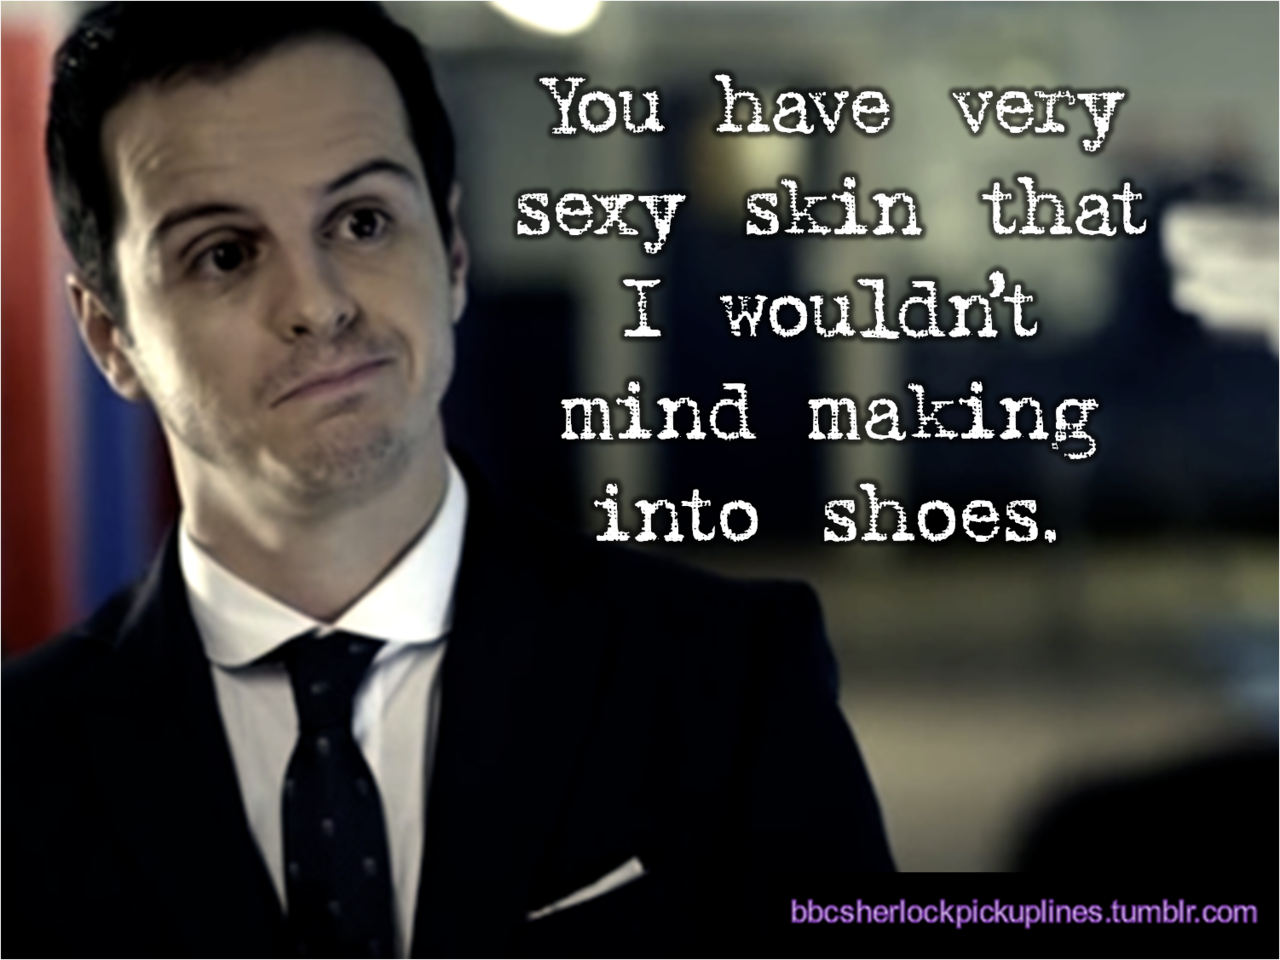 &ldquo;You have very sexy skin that I wouldn&rsquo;t mind making into shoes.&rdquo;